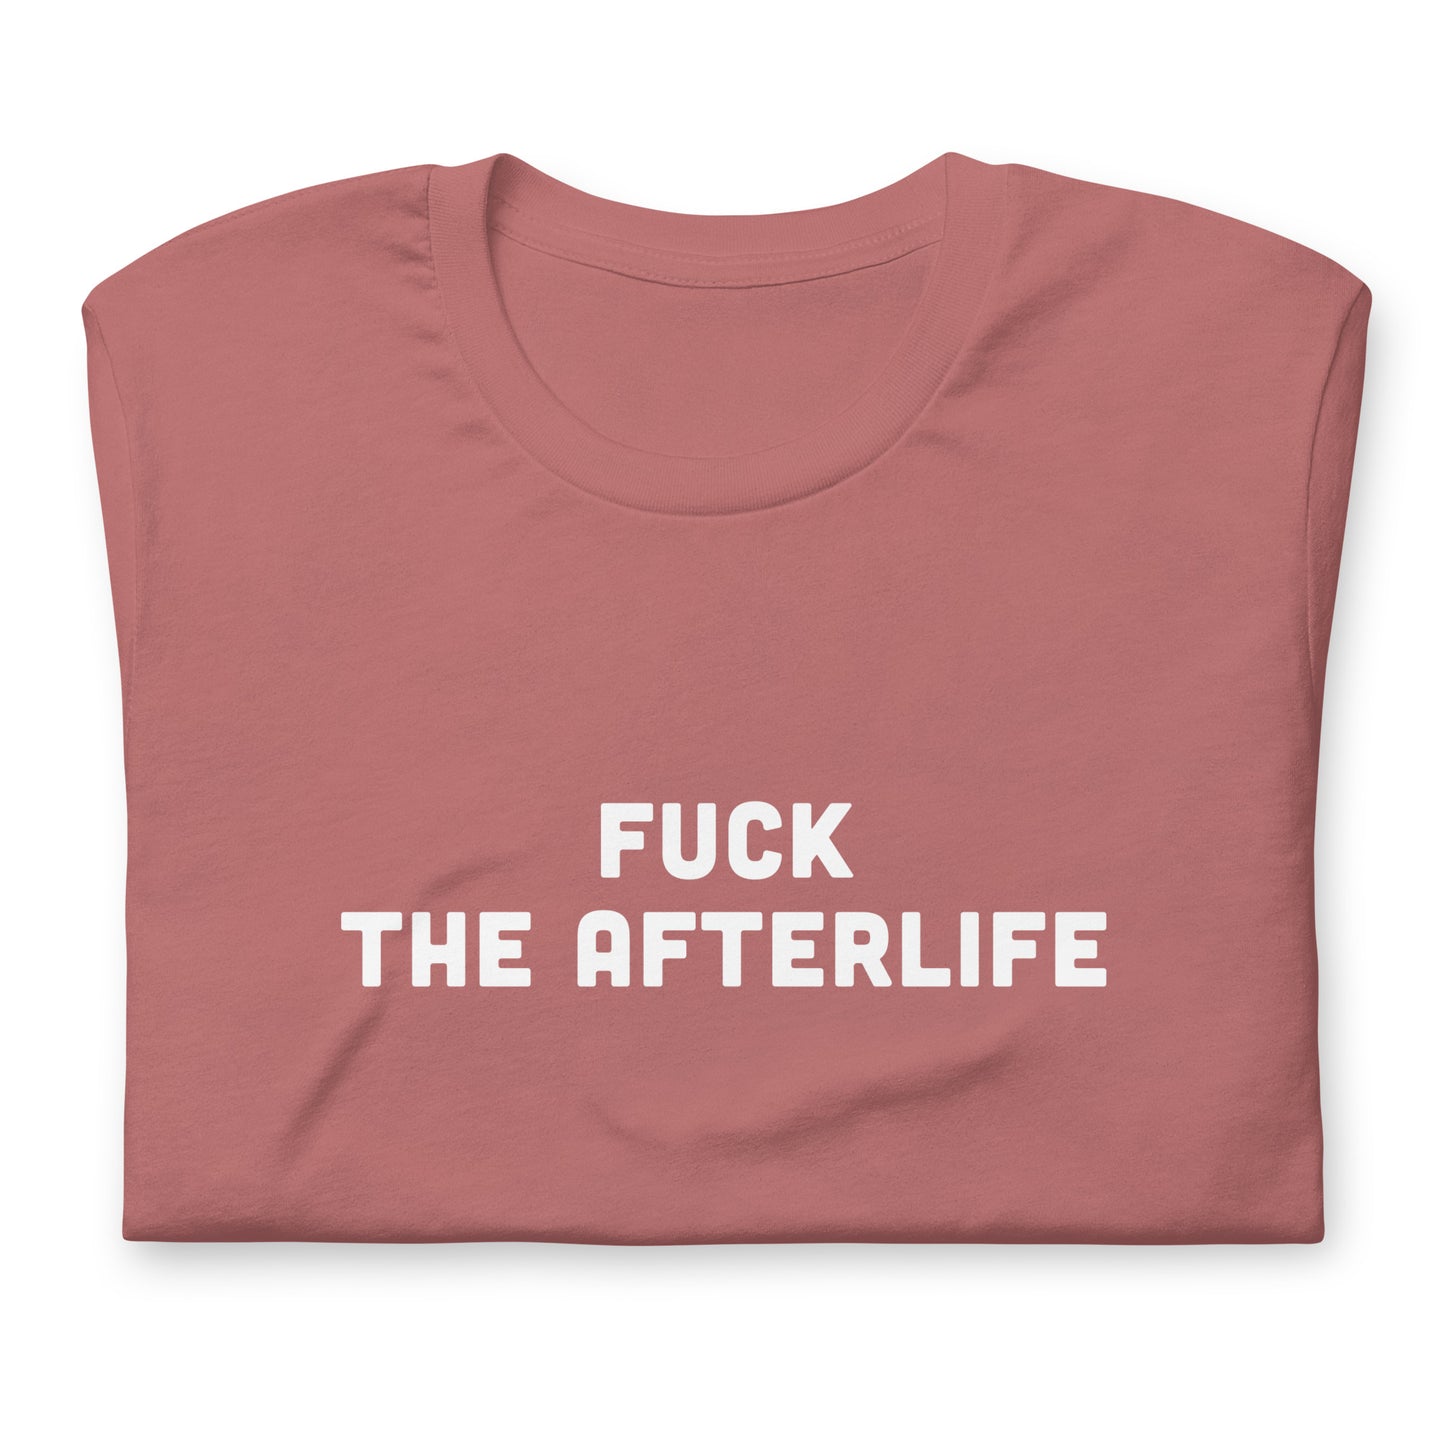 Fuck The Afterlife T-Shirt Size XL Color Navy